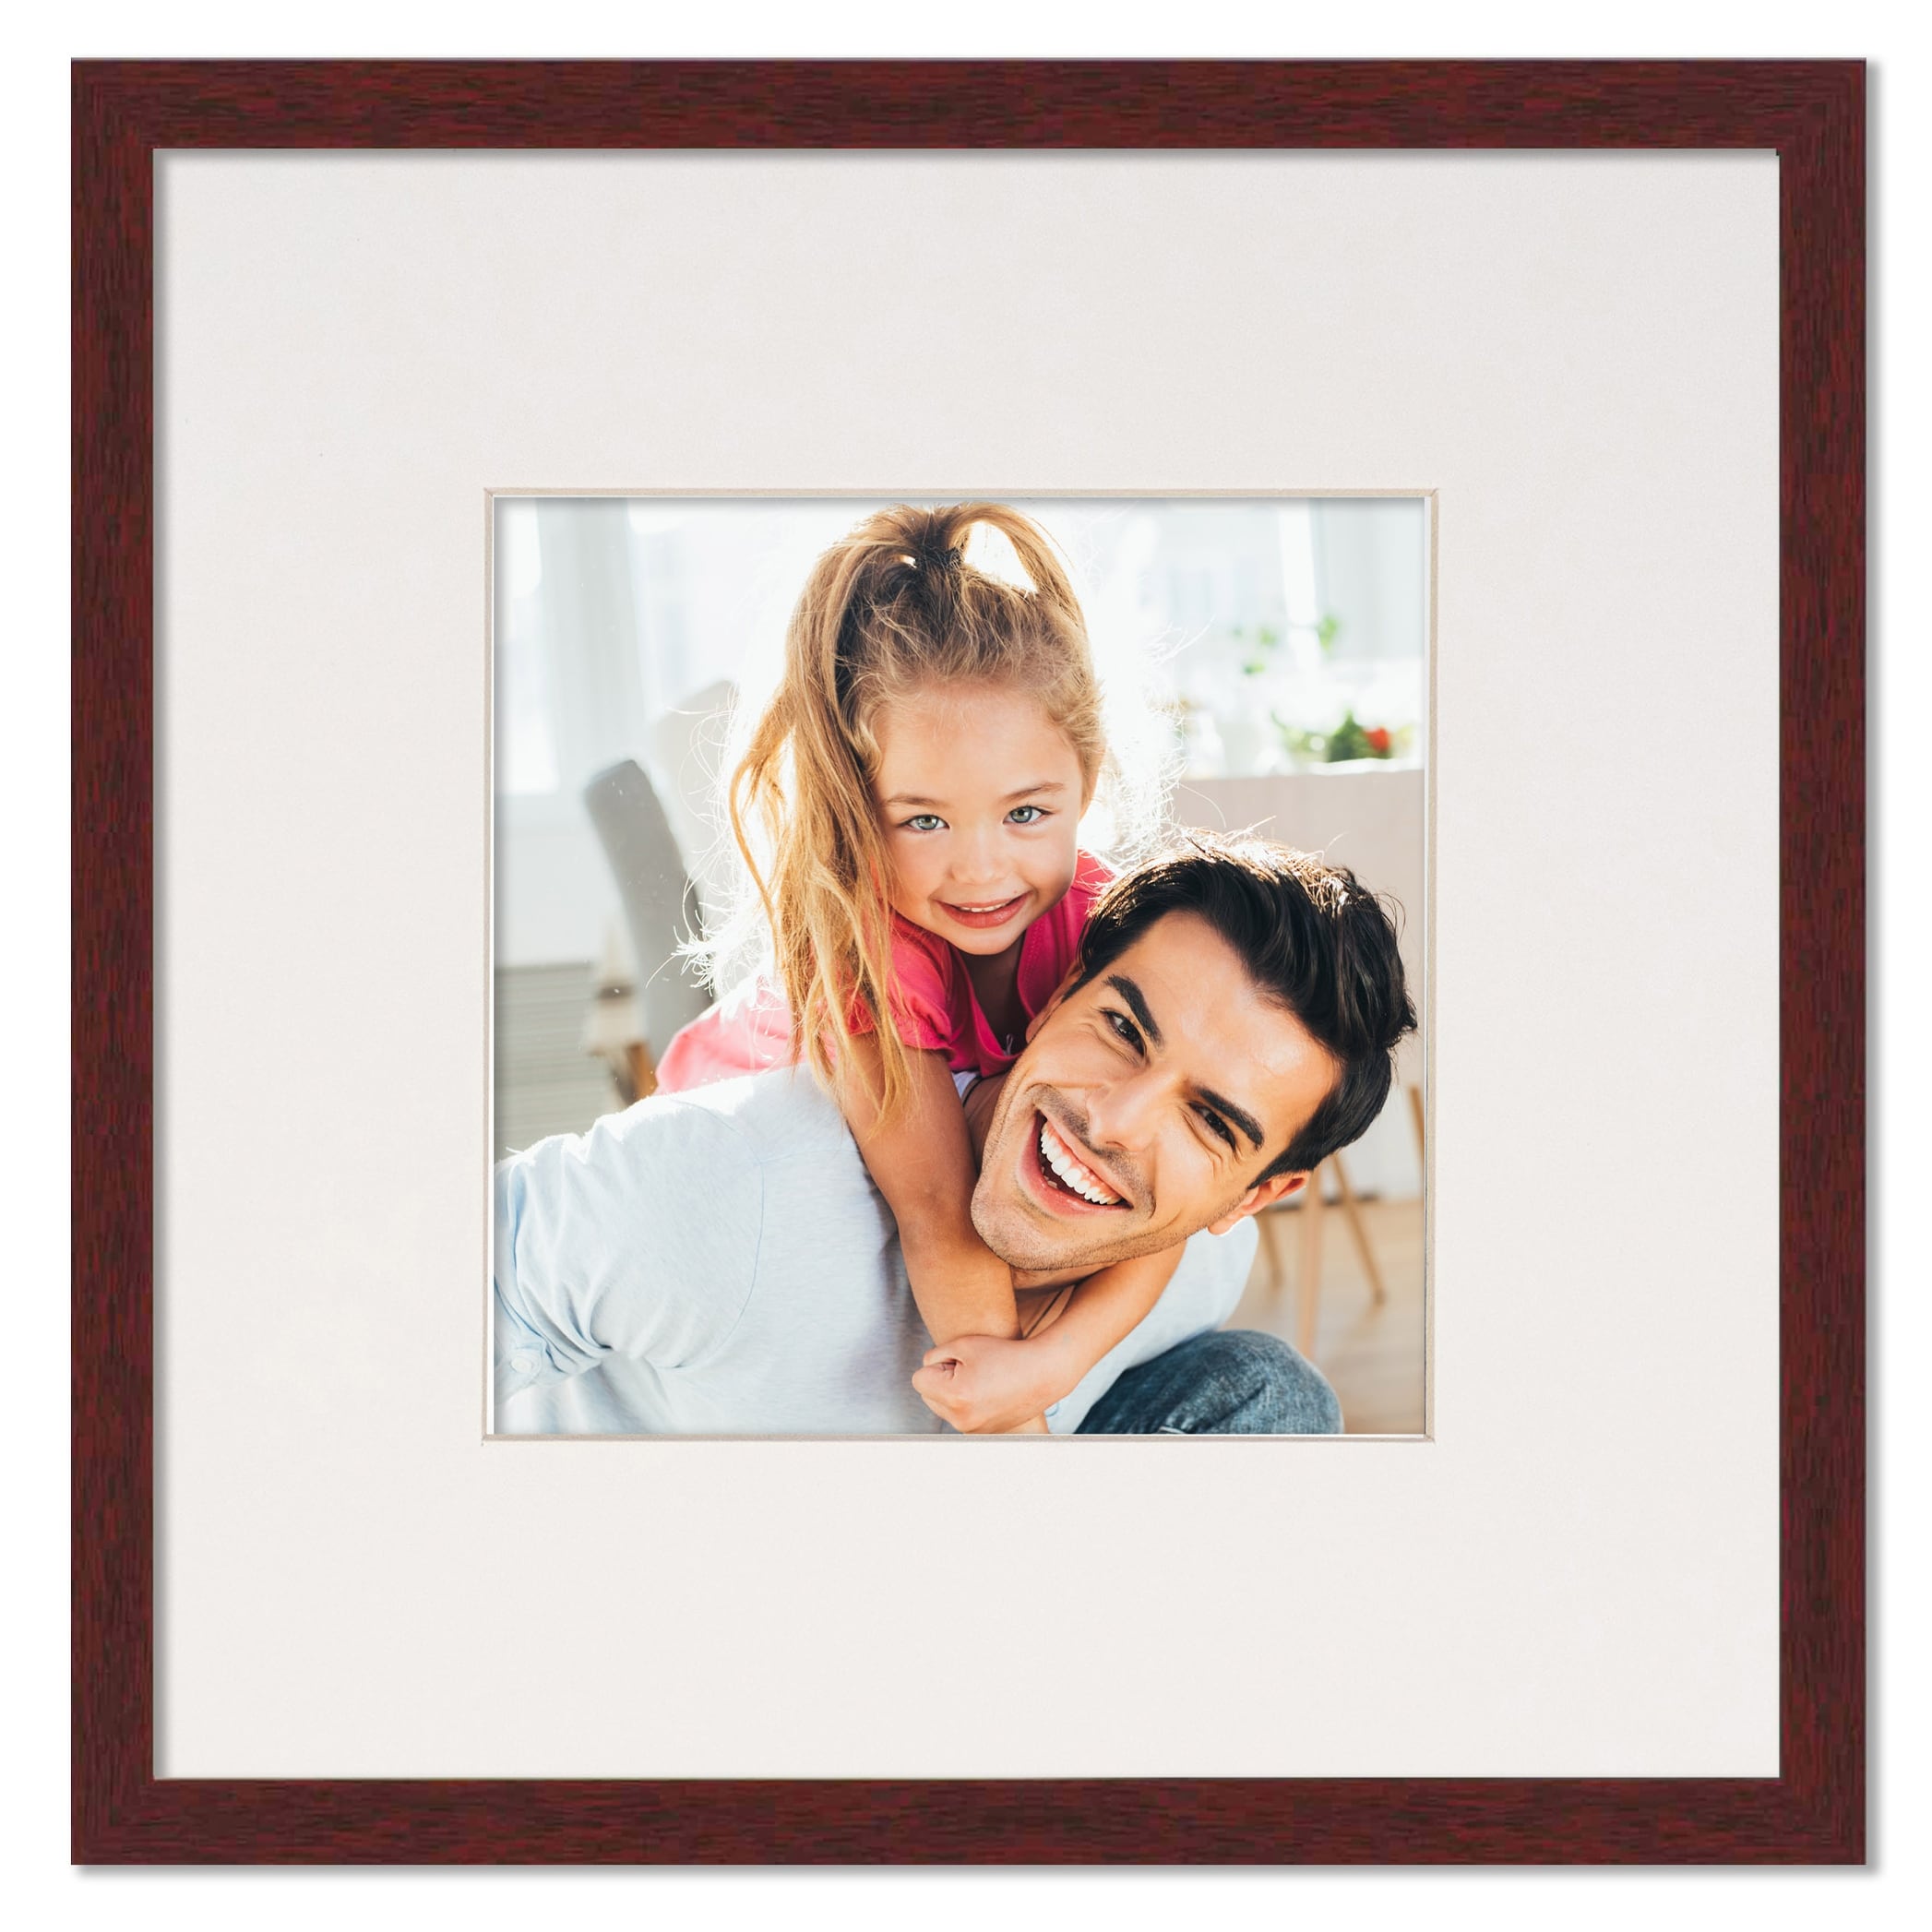 HAUS AND HUES Solid Oak 8x8 Picture Frame Matted to 4x4 - 8x8 Square  White Picture Frames, Square Picture Frame Wood, 8 x 8 Picture Frames with  Mat, White Poster Frames with